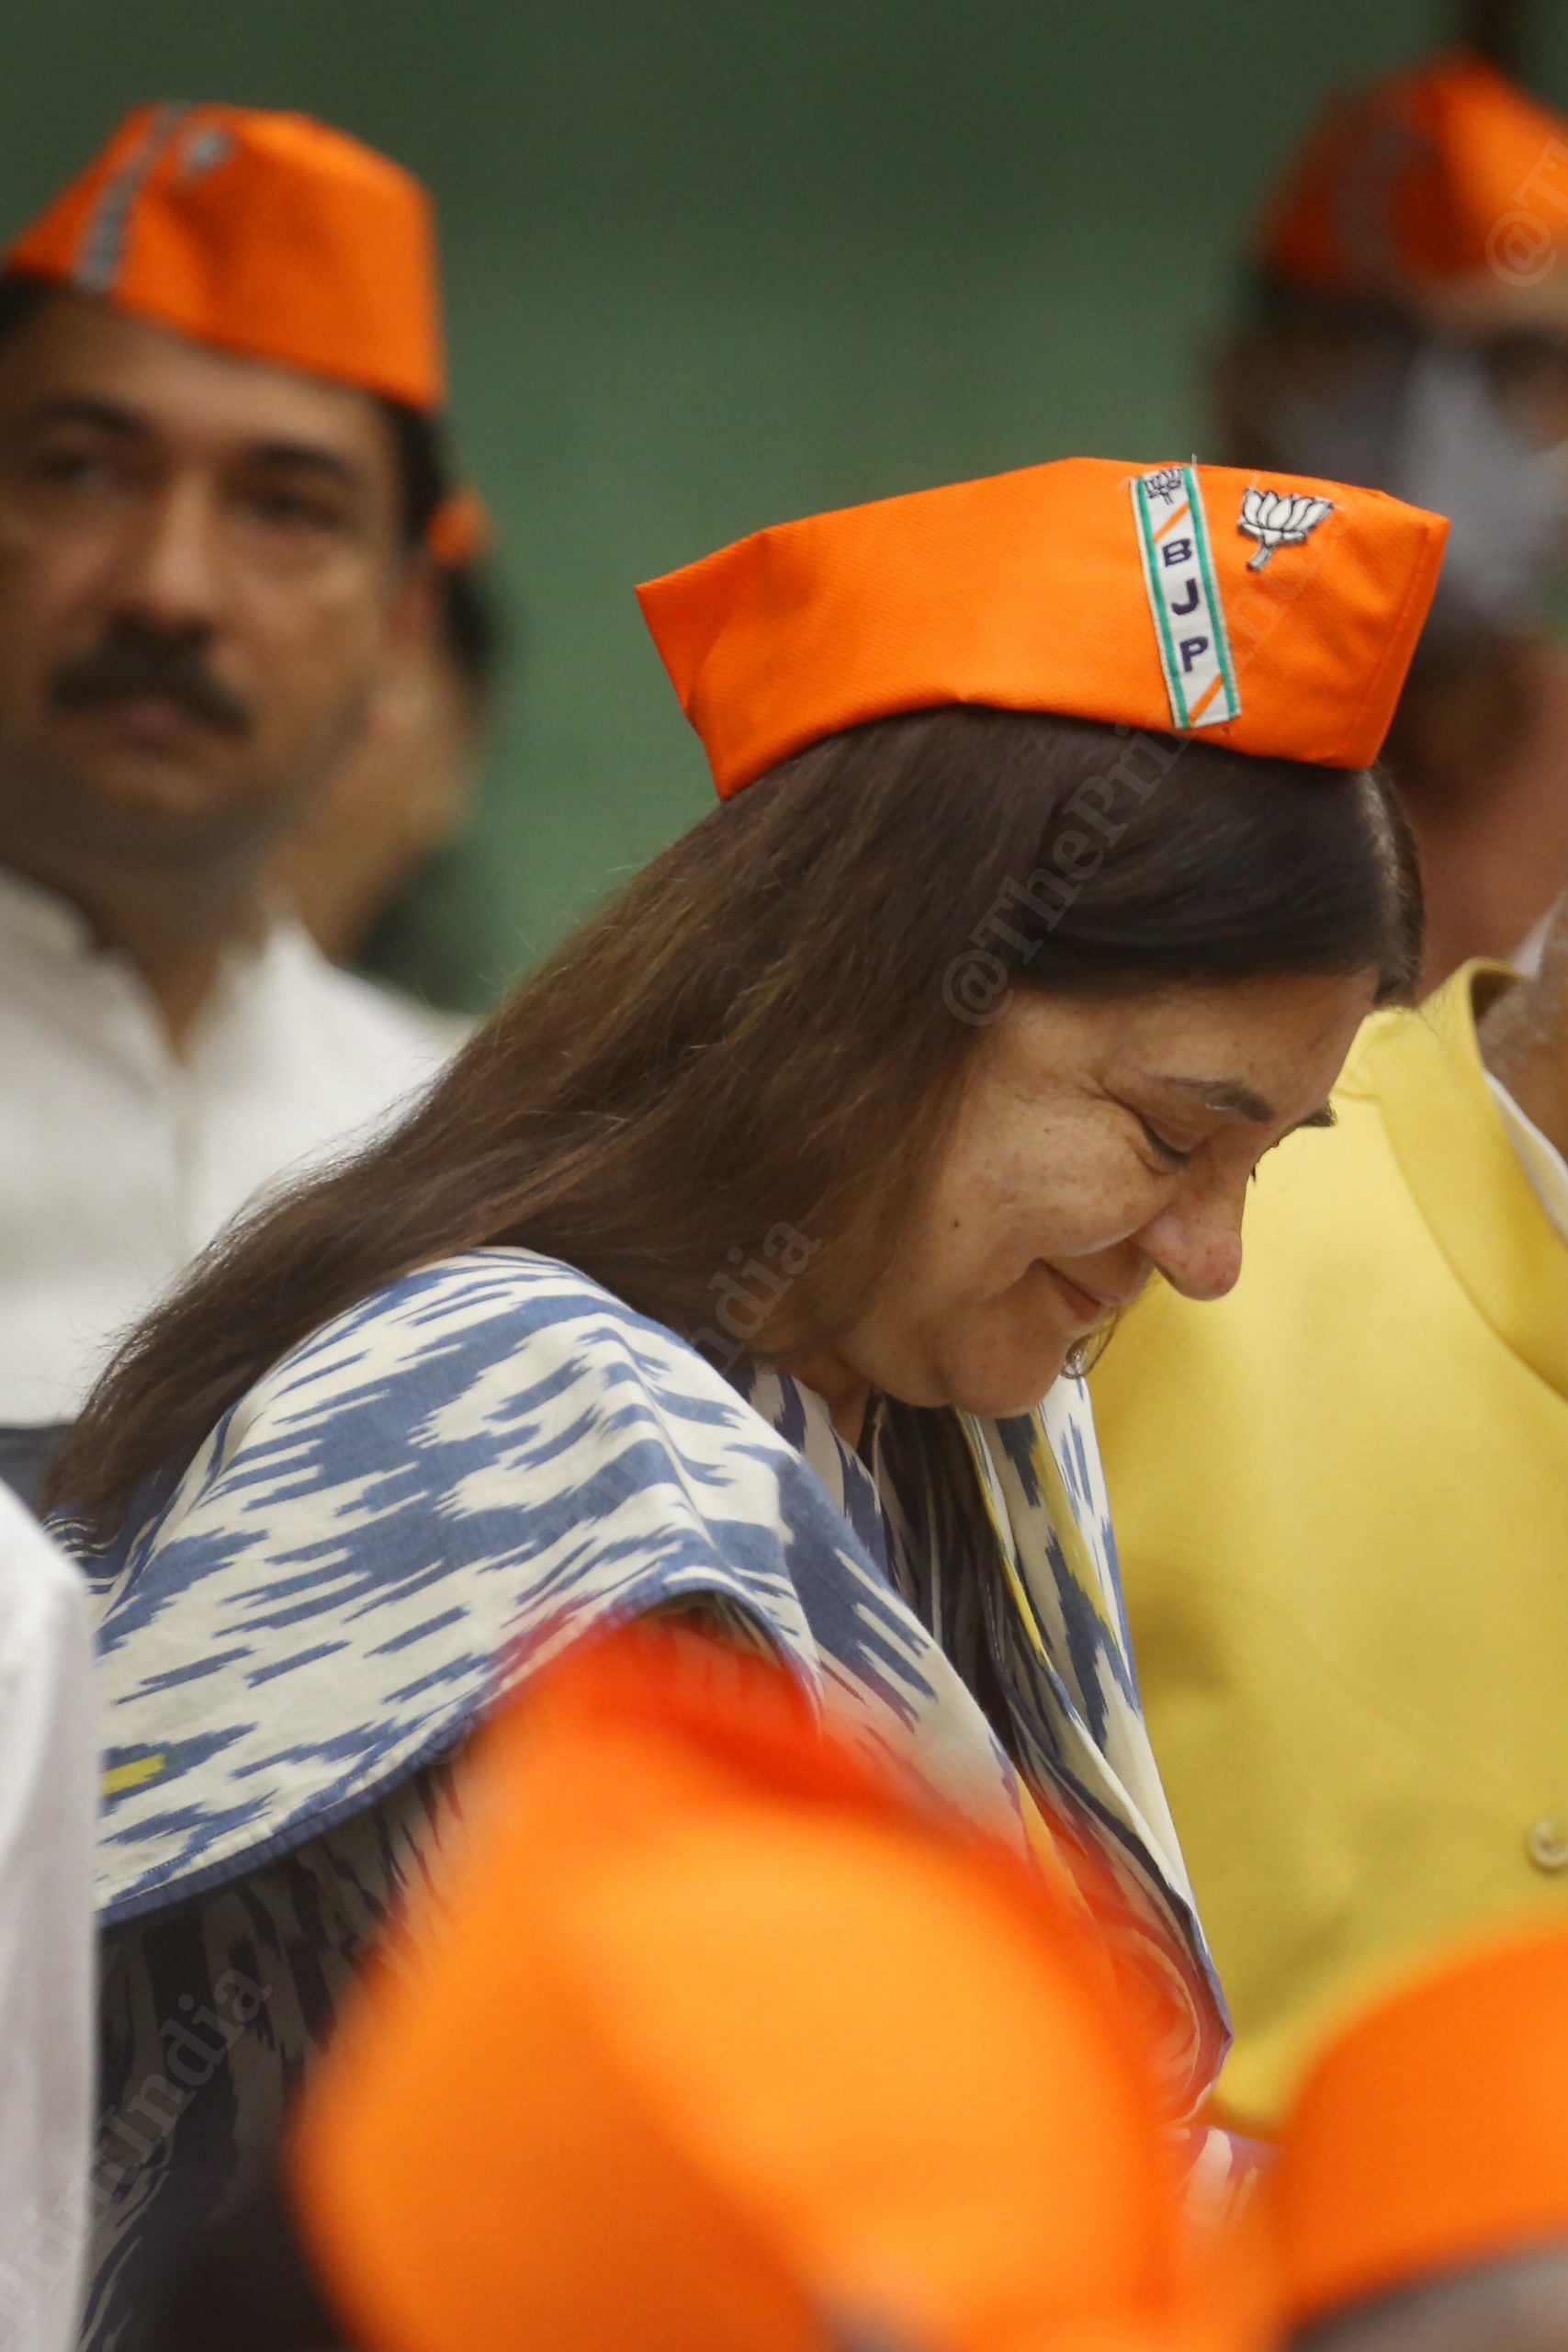 MP Maneka Gandhi reacts to something as she attends the BJP's 42nd Foundation Day event at Parliament Annexe | Photo: Praveen Jain | ThePrint